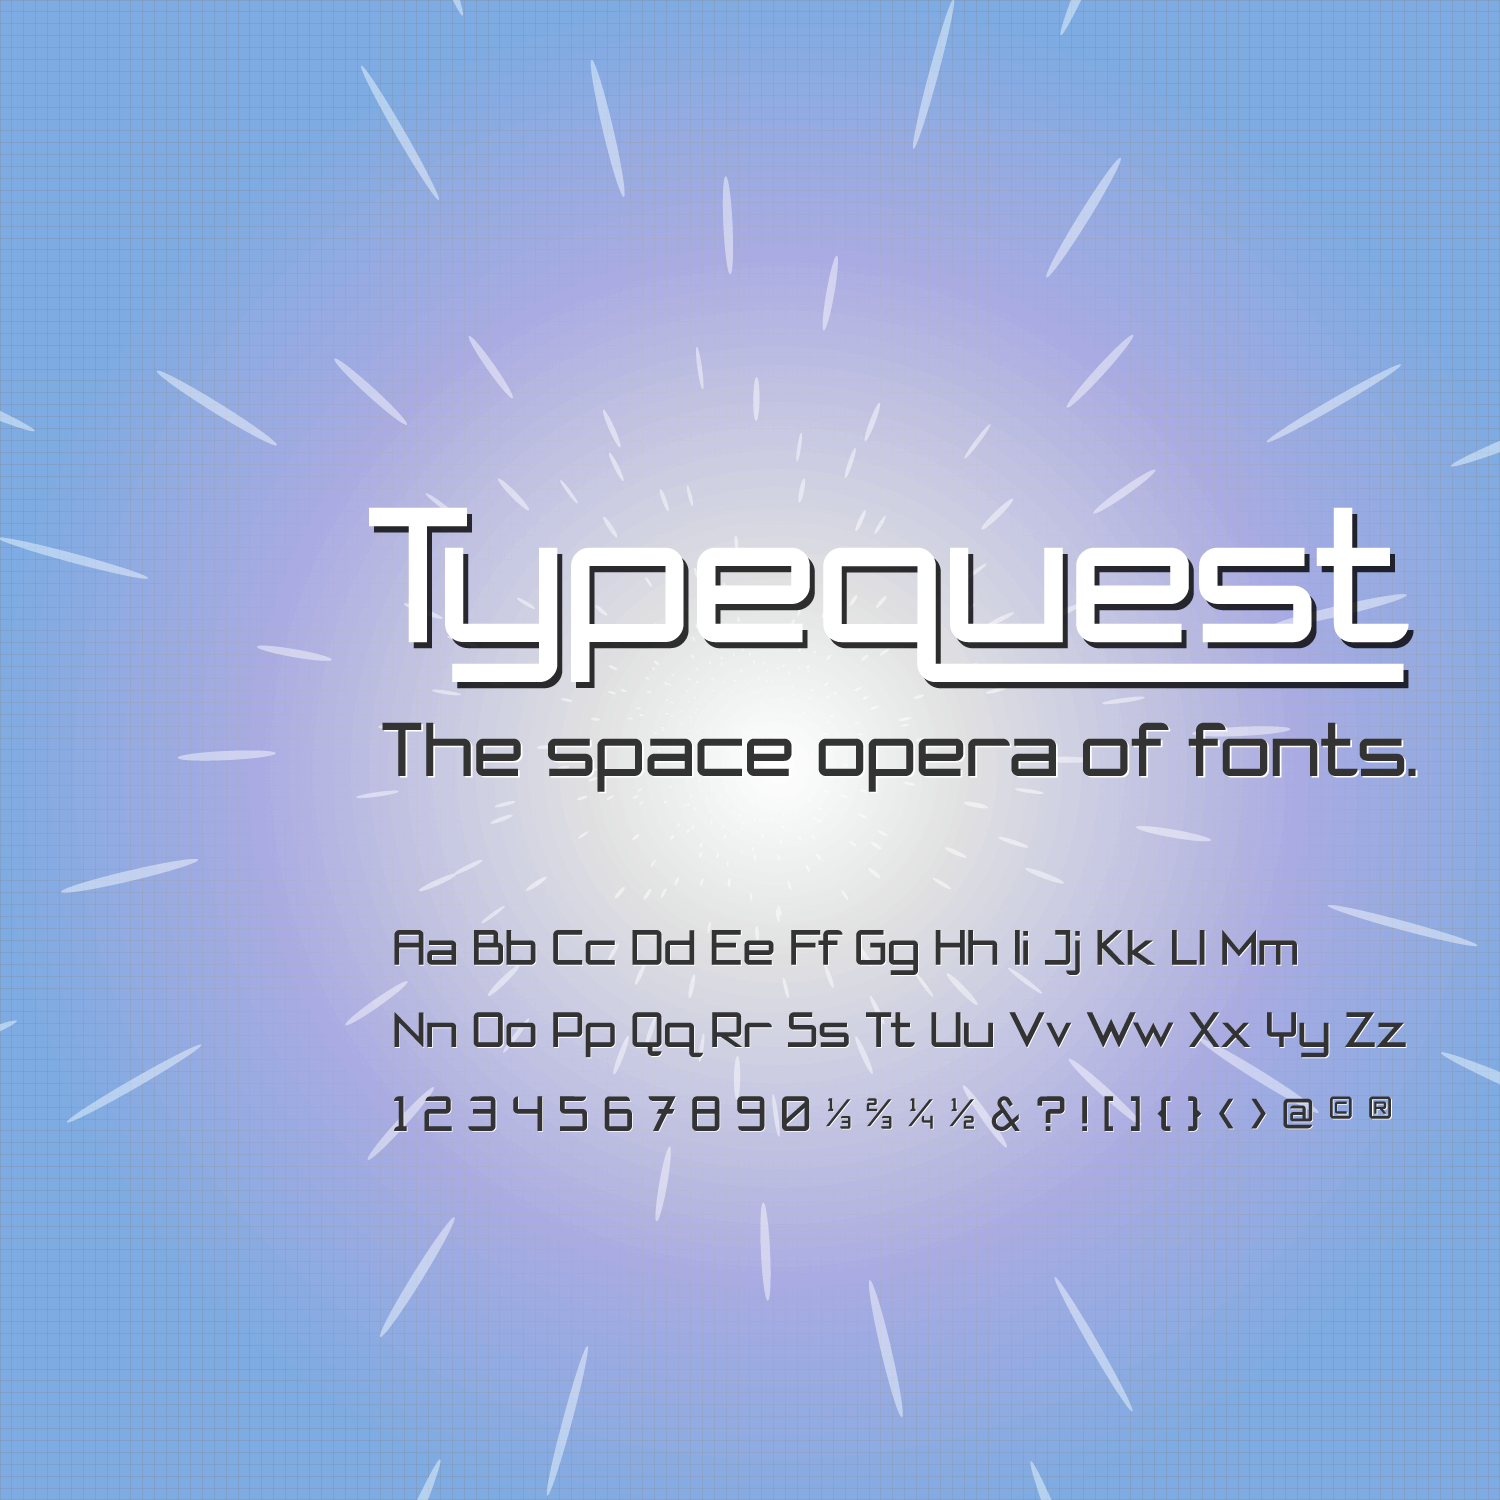 type samples of the font fontquest